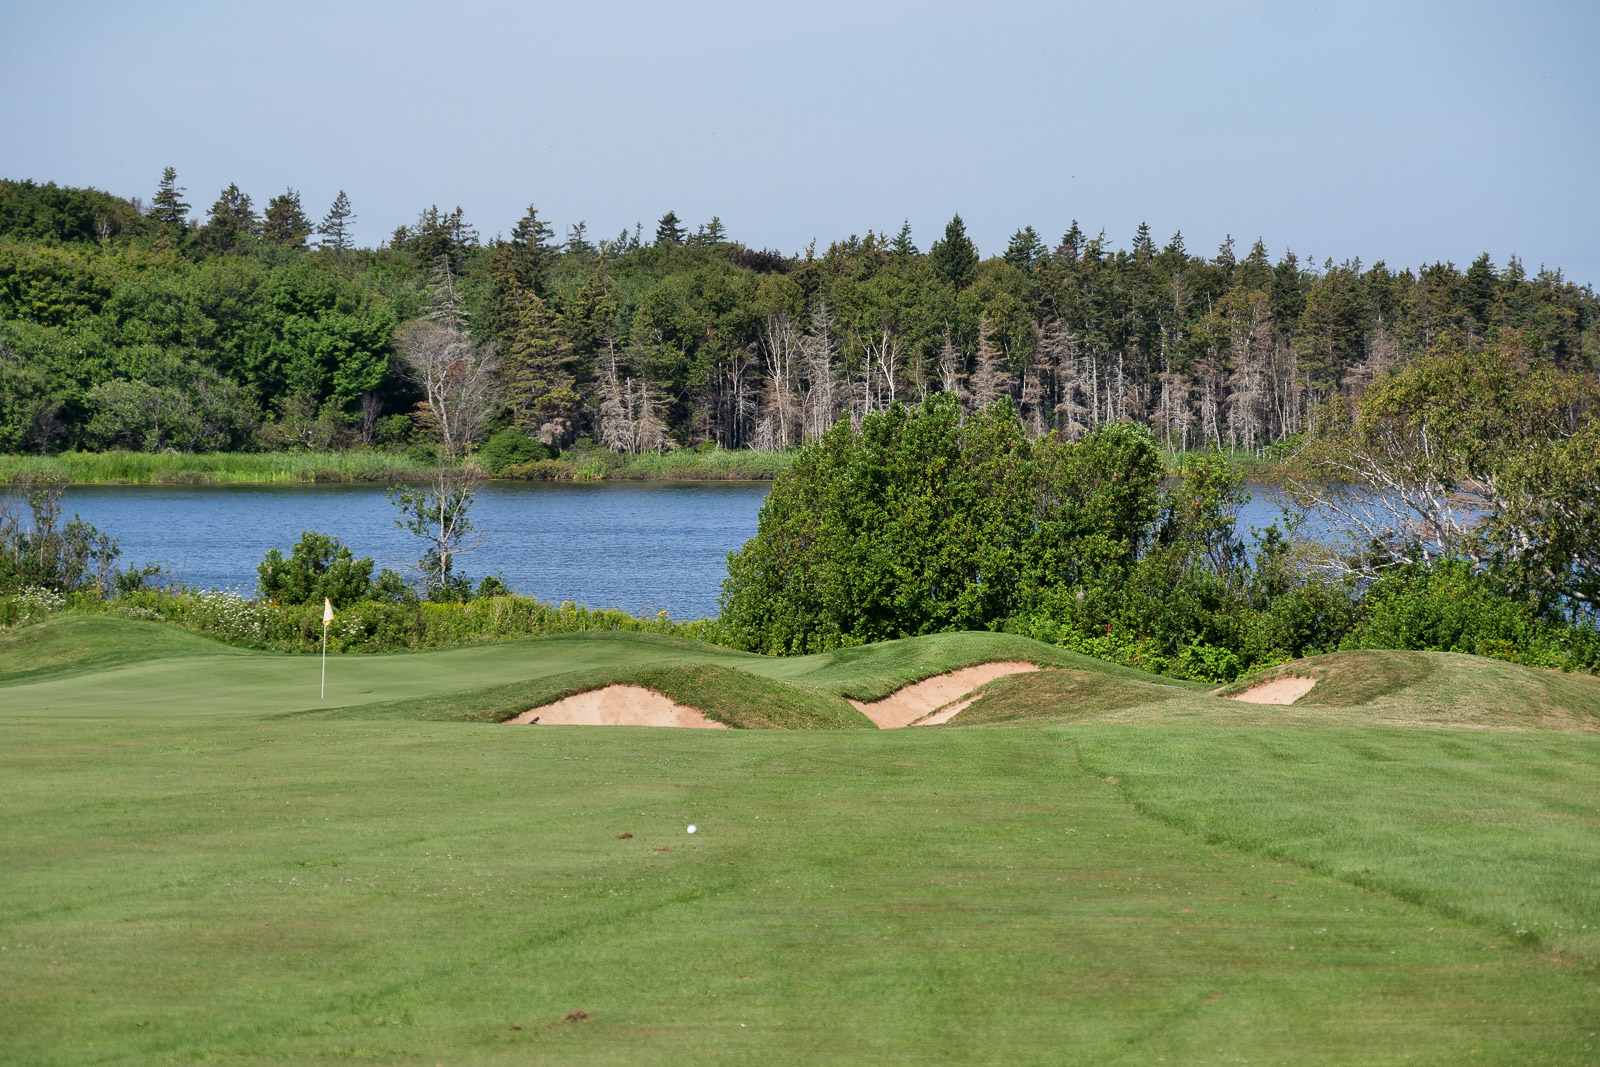 The approach on 13 at Green Gables